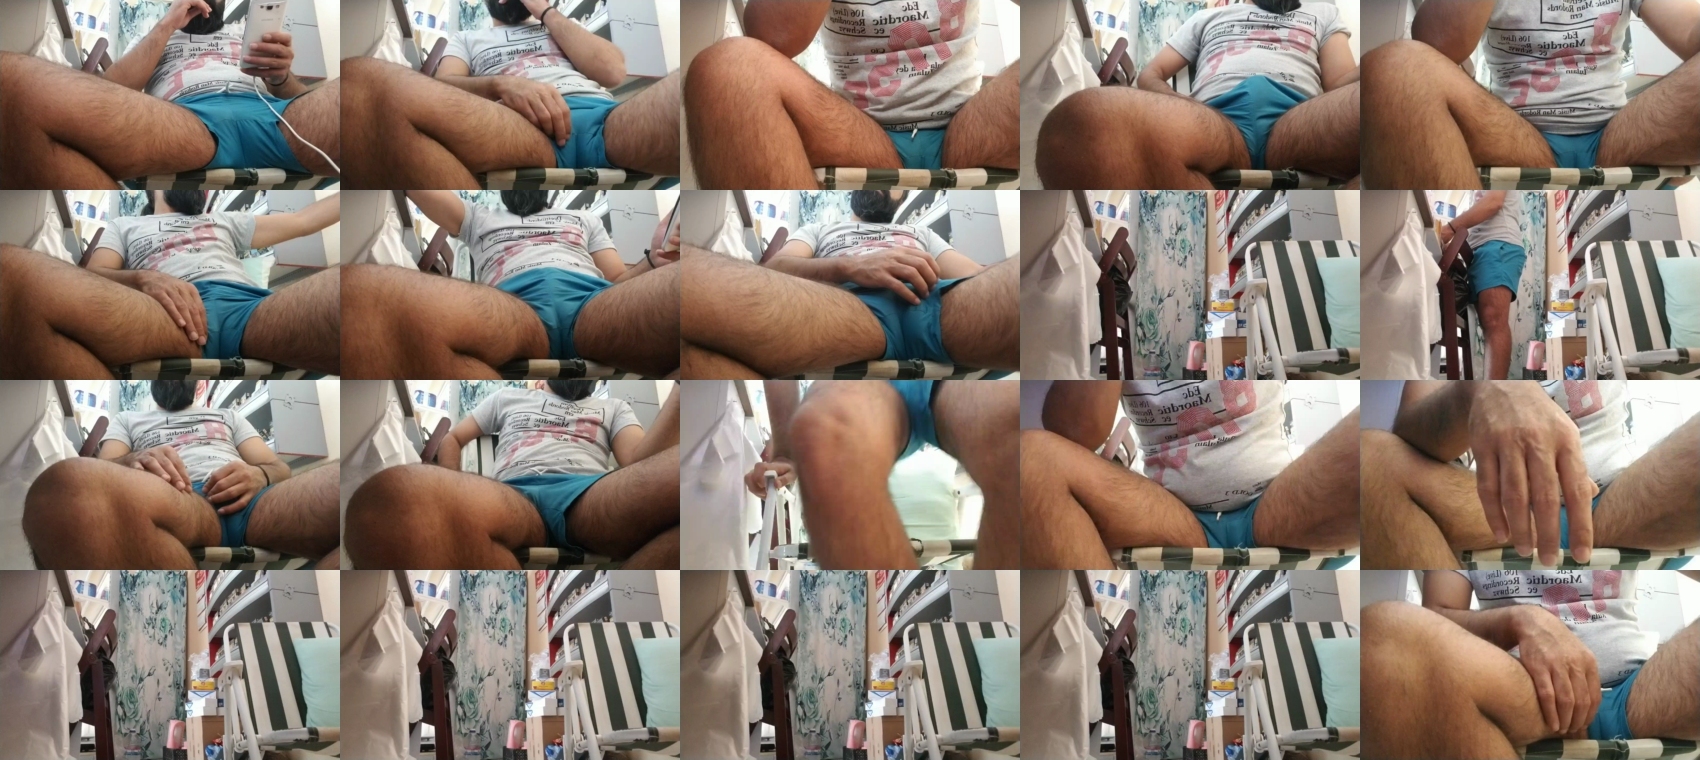 billy1727  09-06-2022 Recorded Video Naked